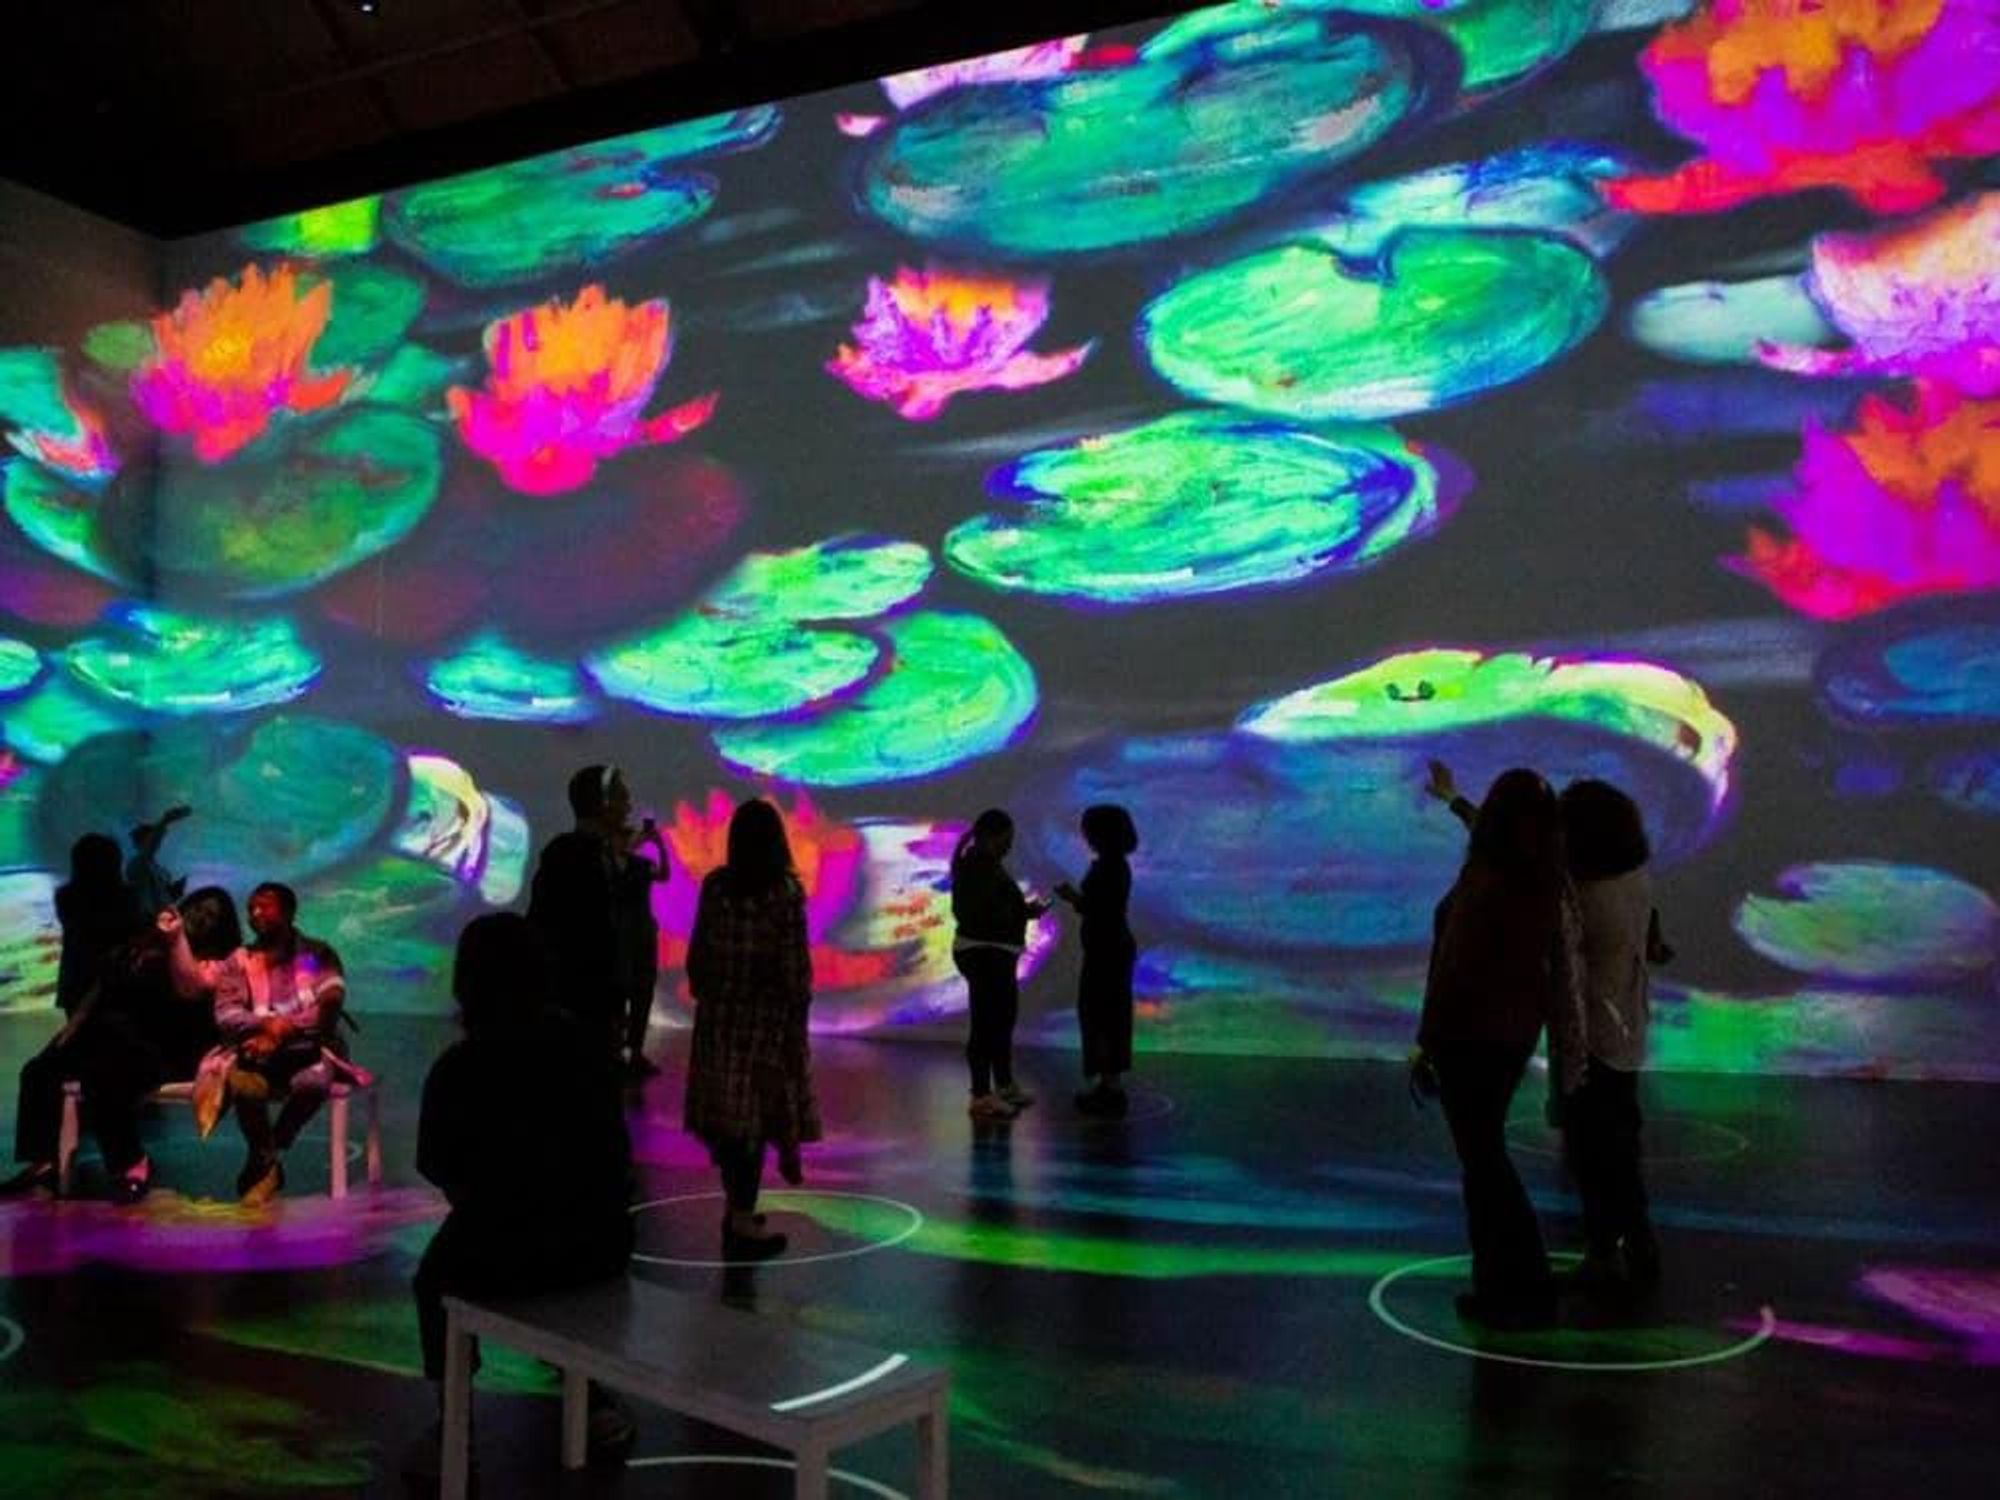 Immersive Monet & The Impressionists comes to Lighthouse ArtSpace Houston on June 24.